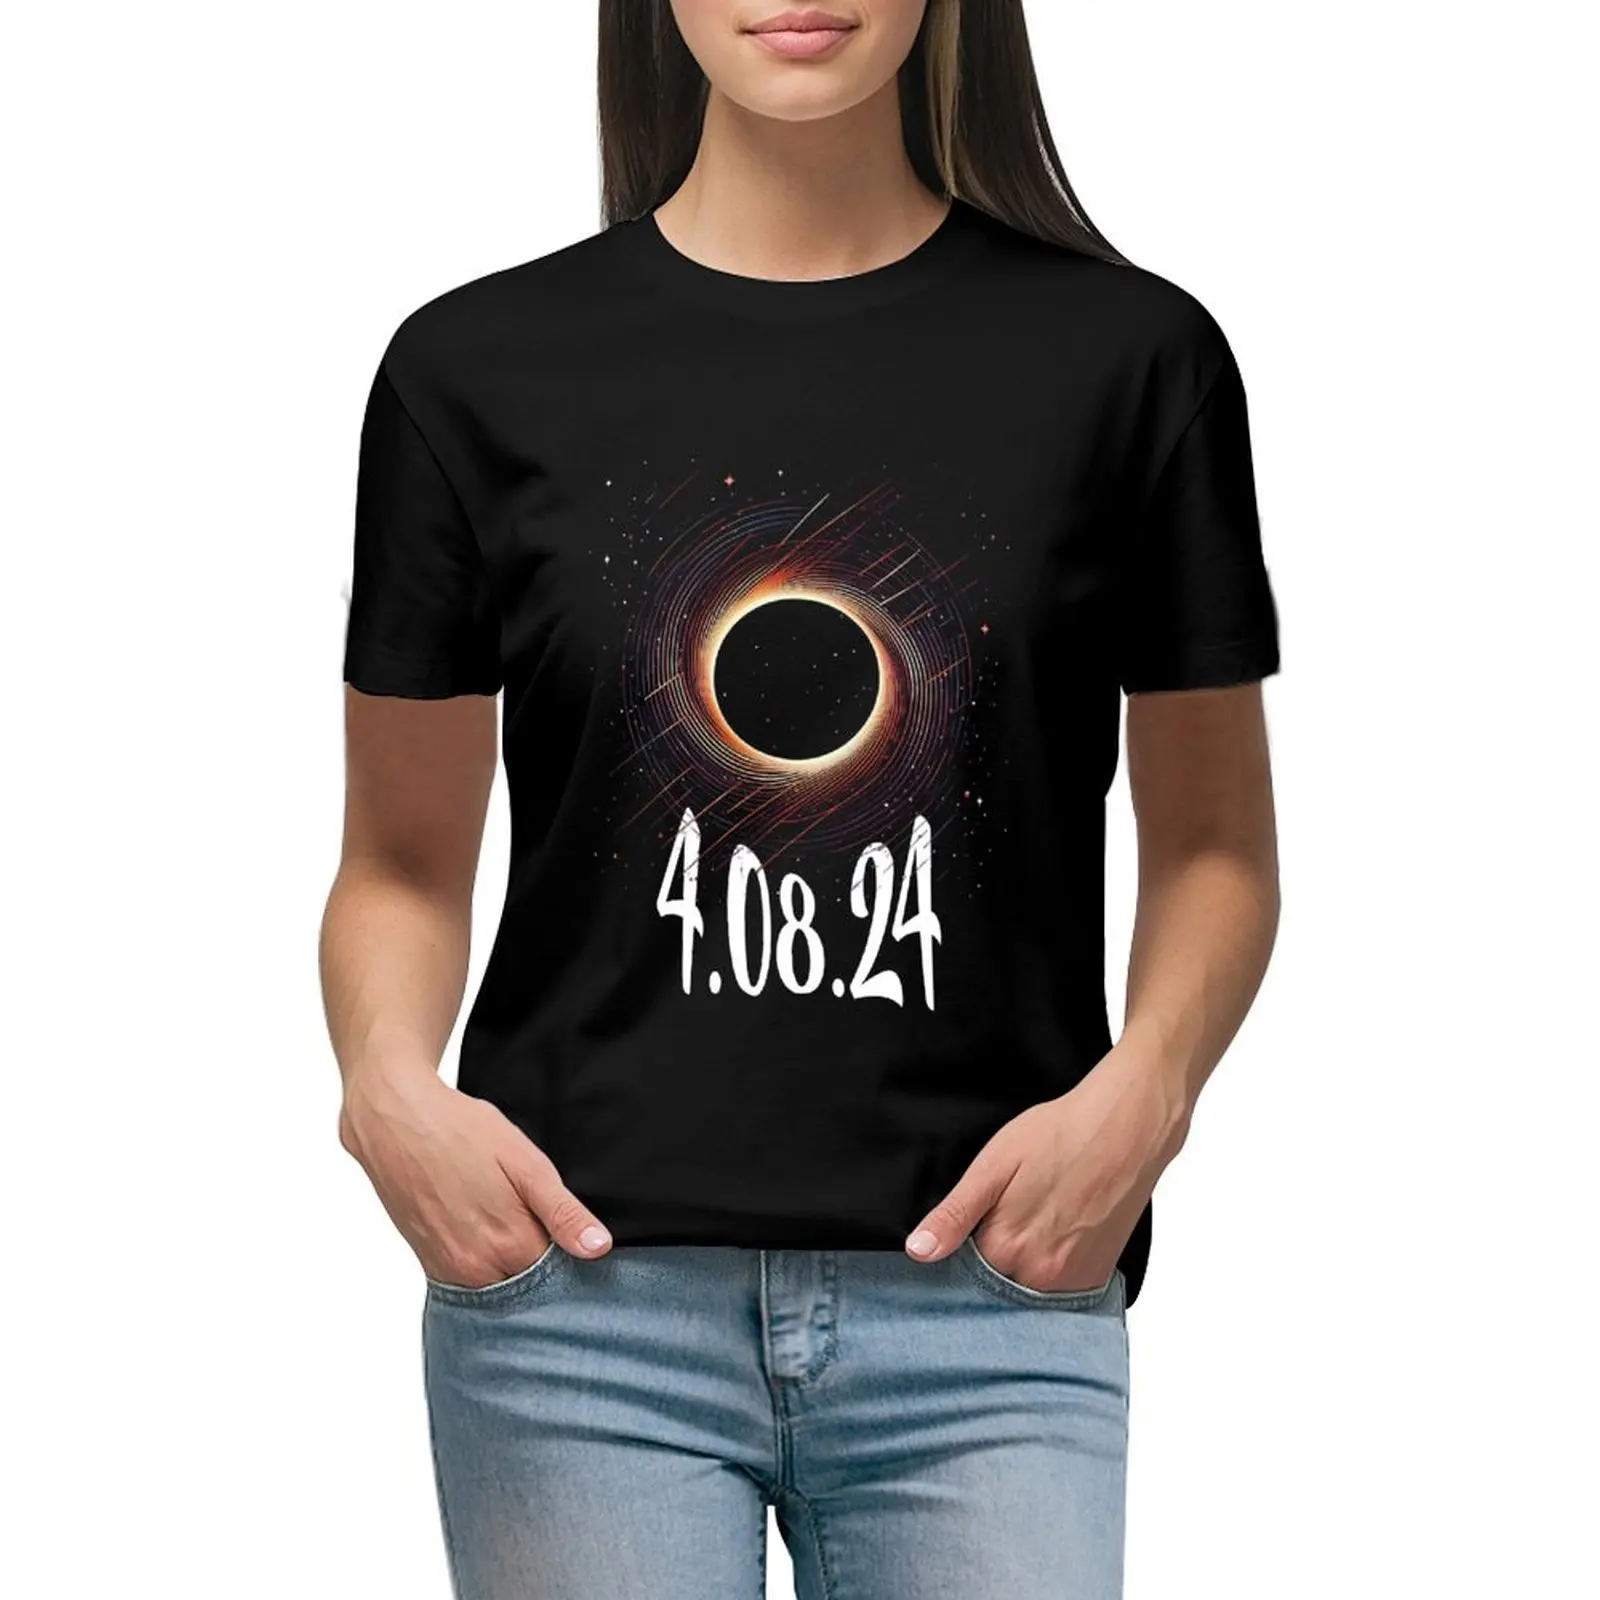 

Total Solar Eclipse 2024 America Totality Spring 4.08.24 USA T-shirt summer top cute clothes t shirts for Women graphic